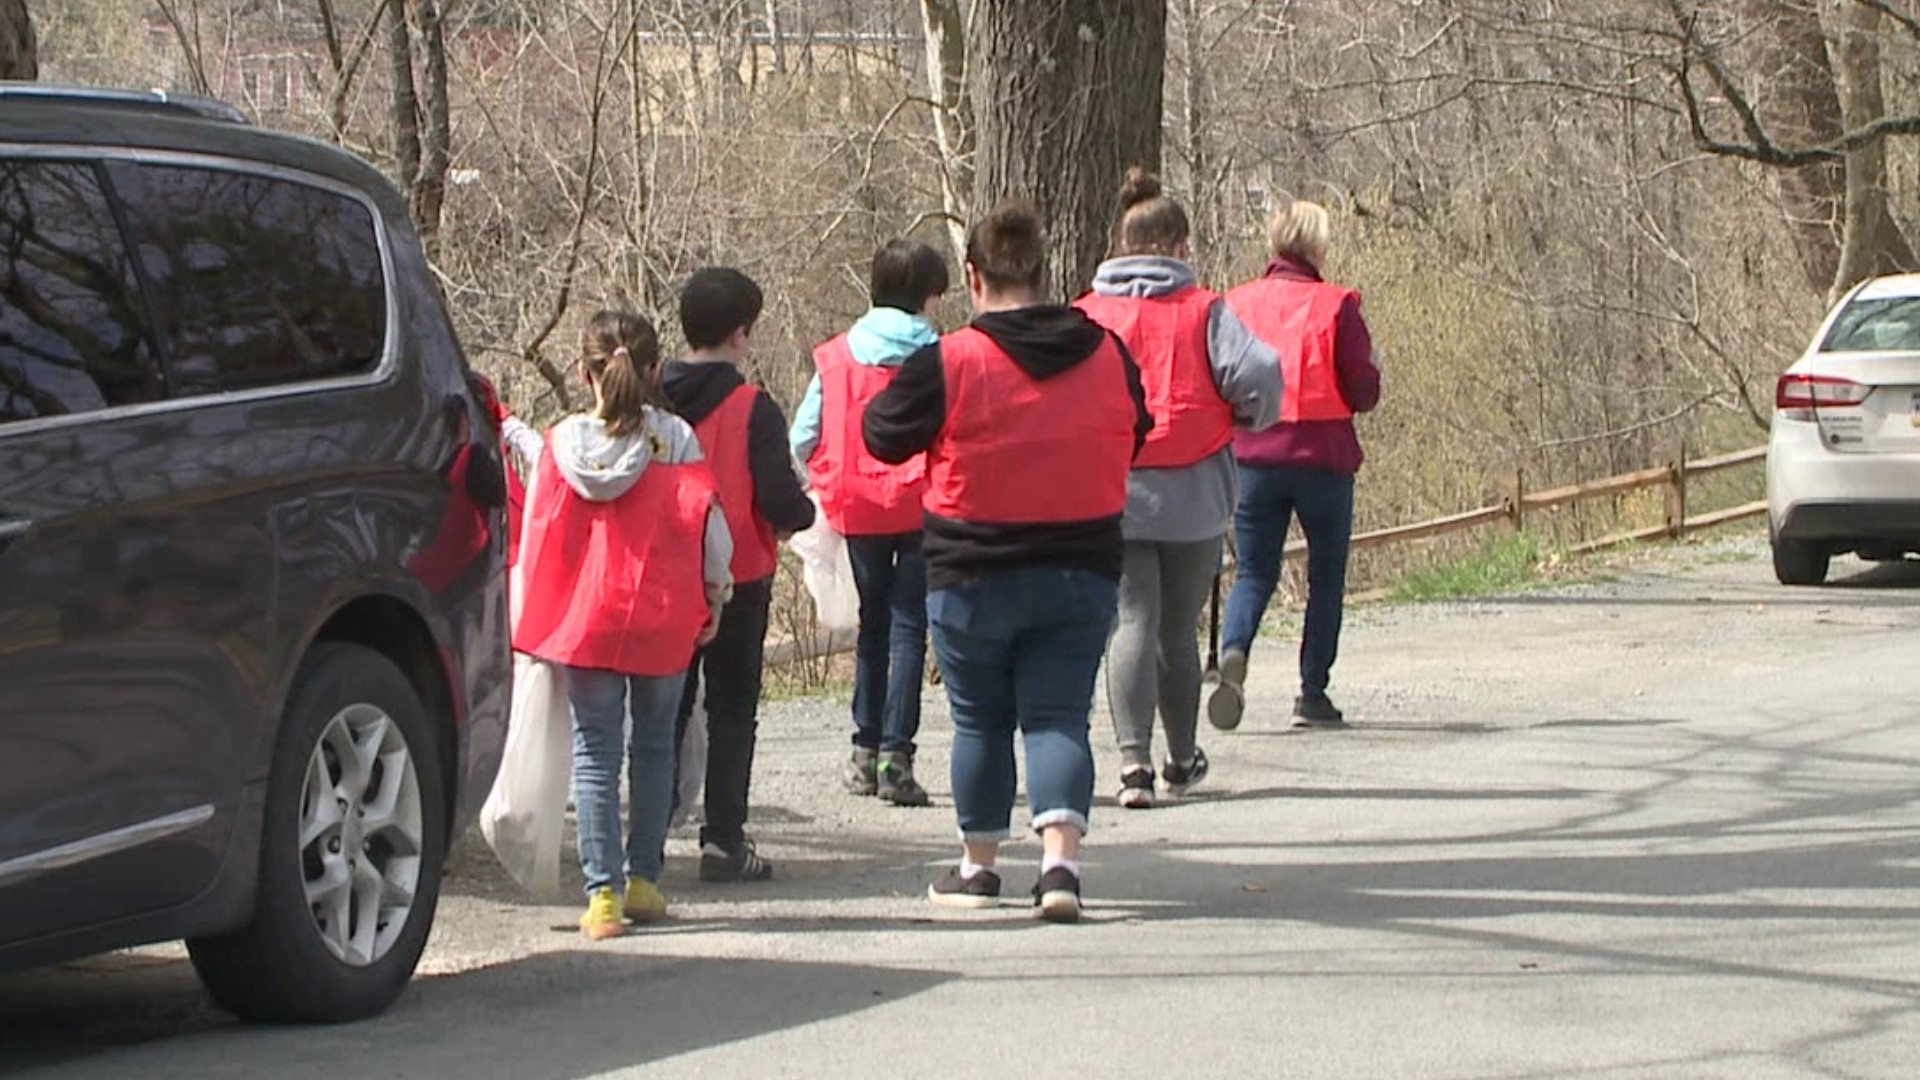 Those in the Poconos are celebrating Earth Day by doing their part and picking up trash.